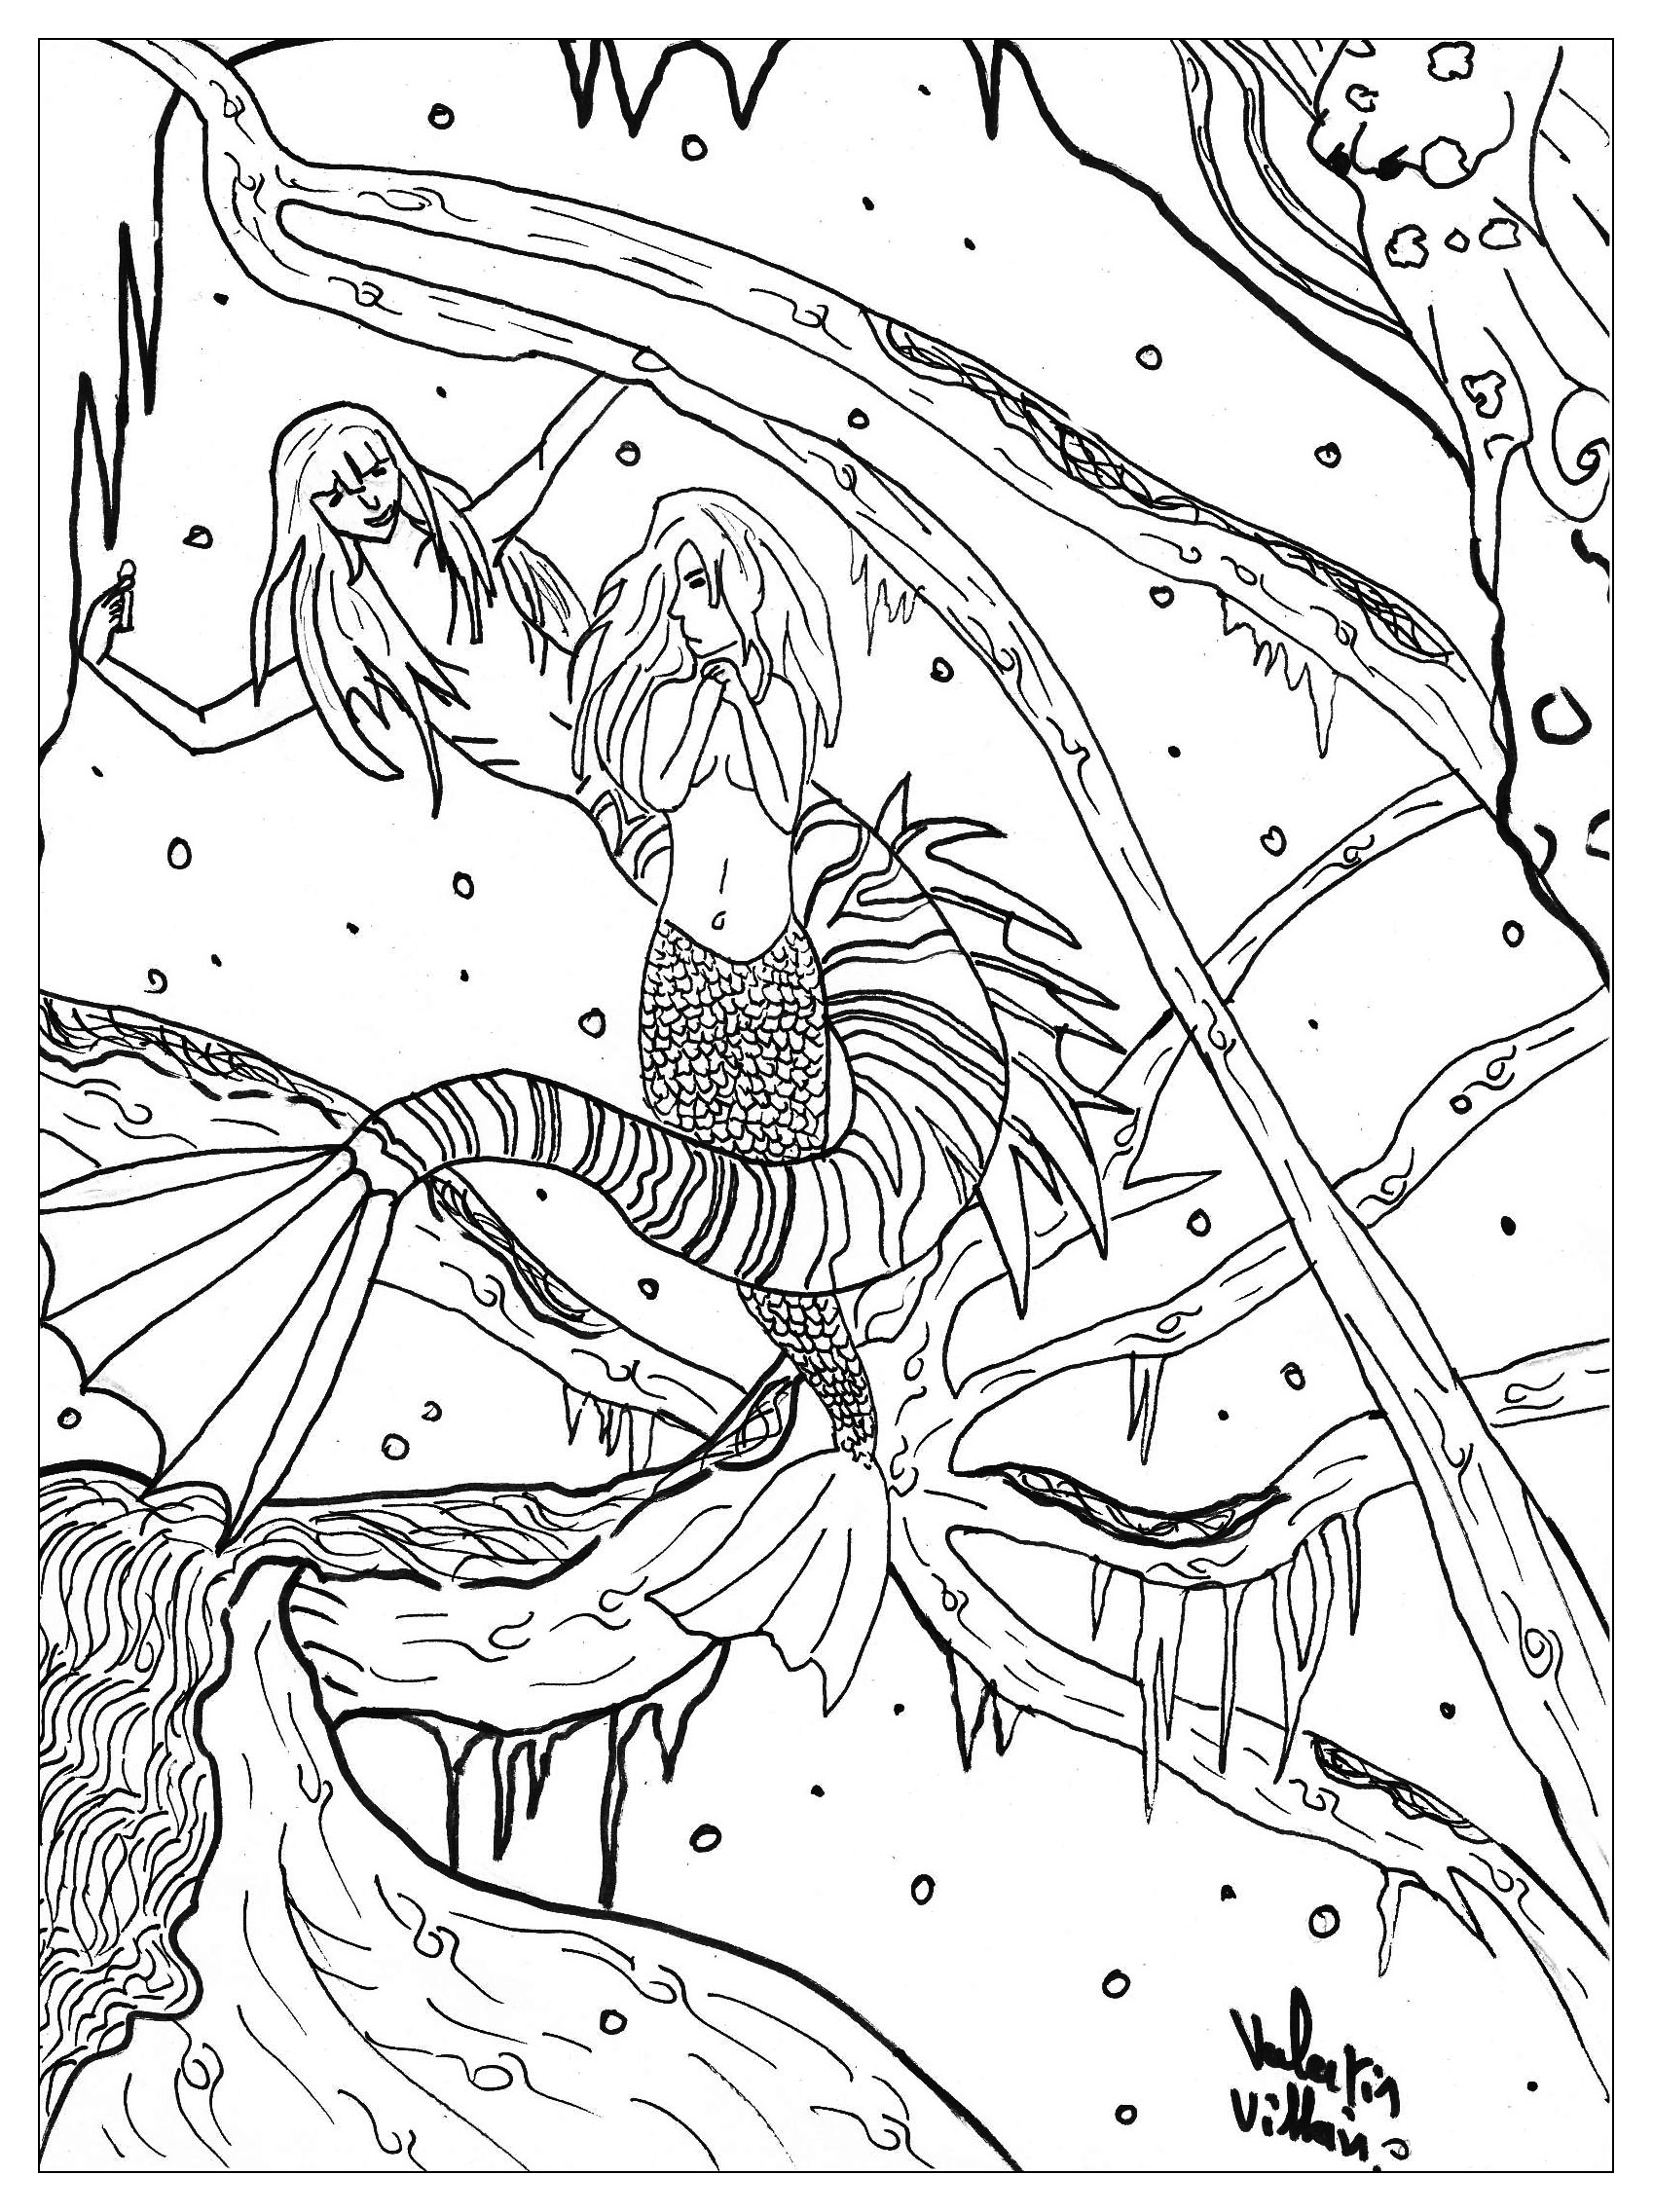 Fairy tales - Coloring pages for adults